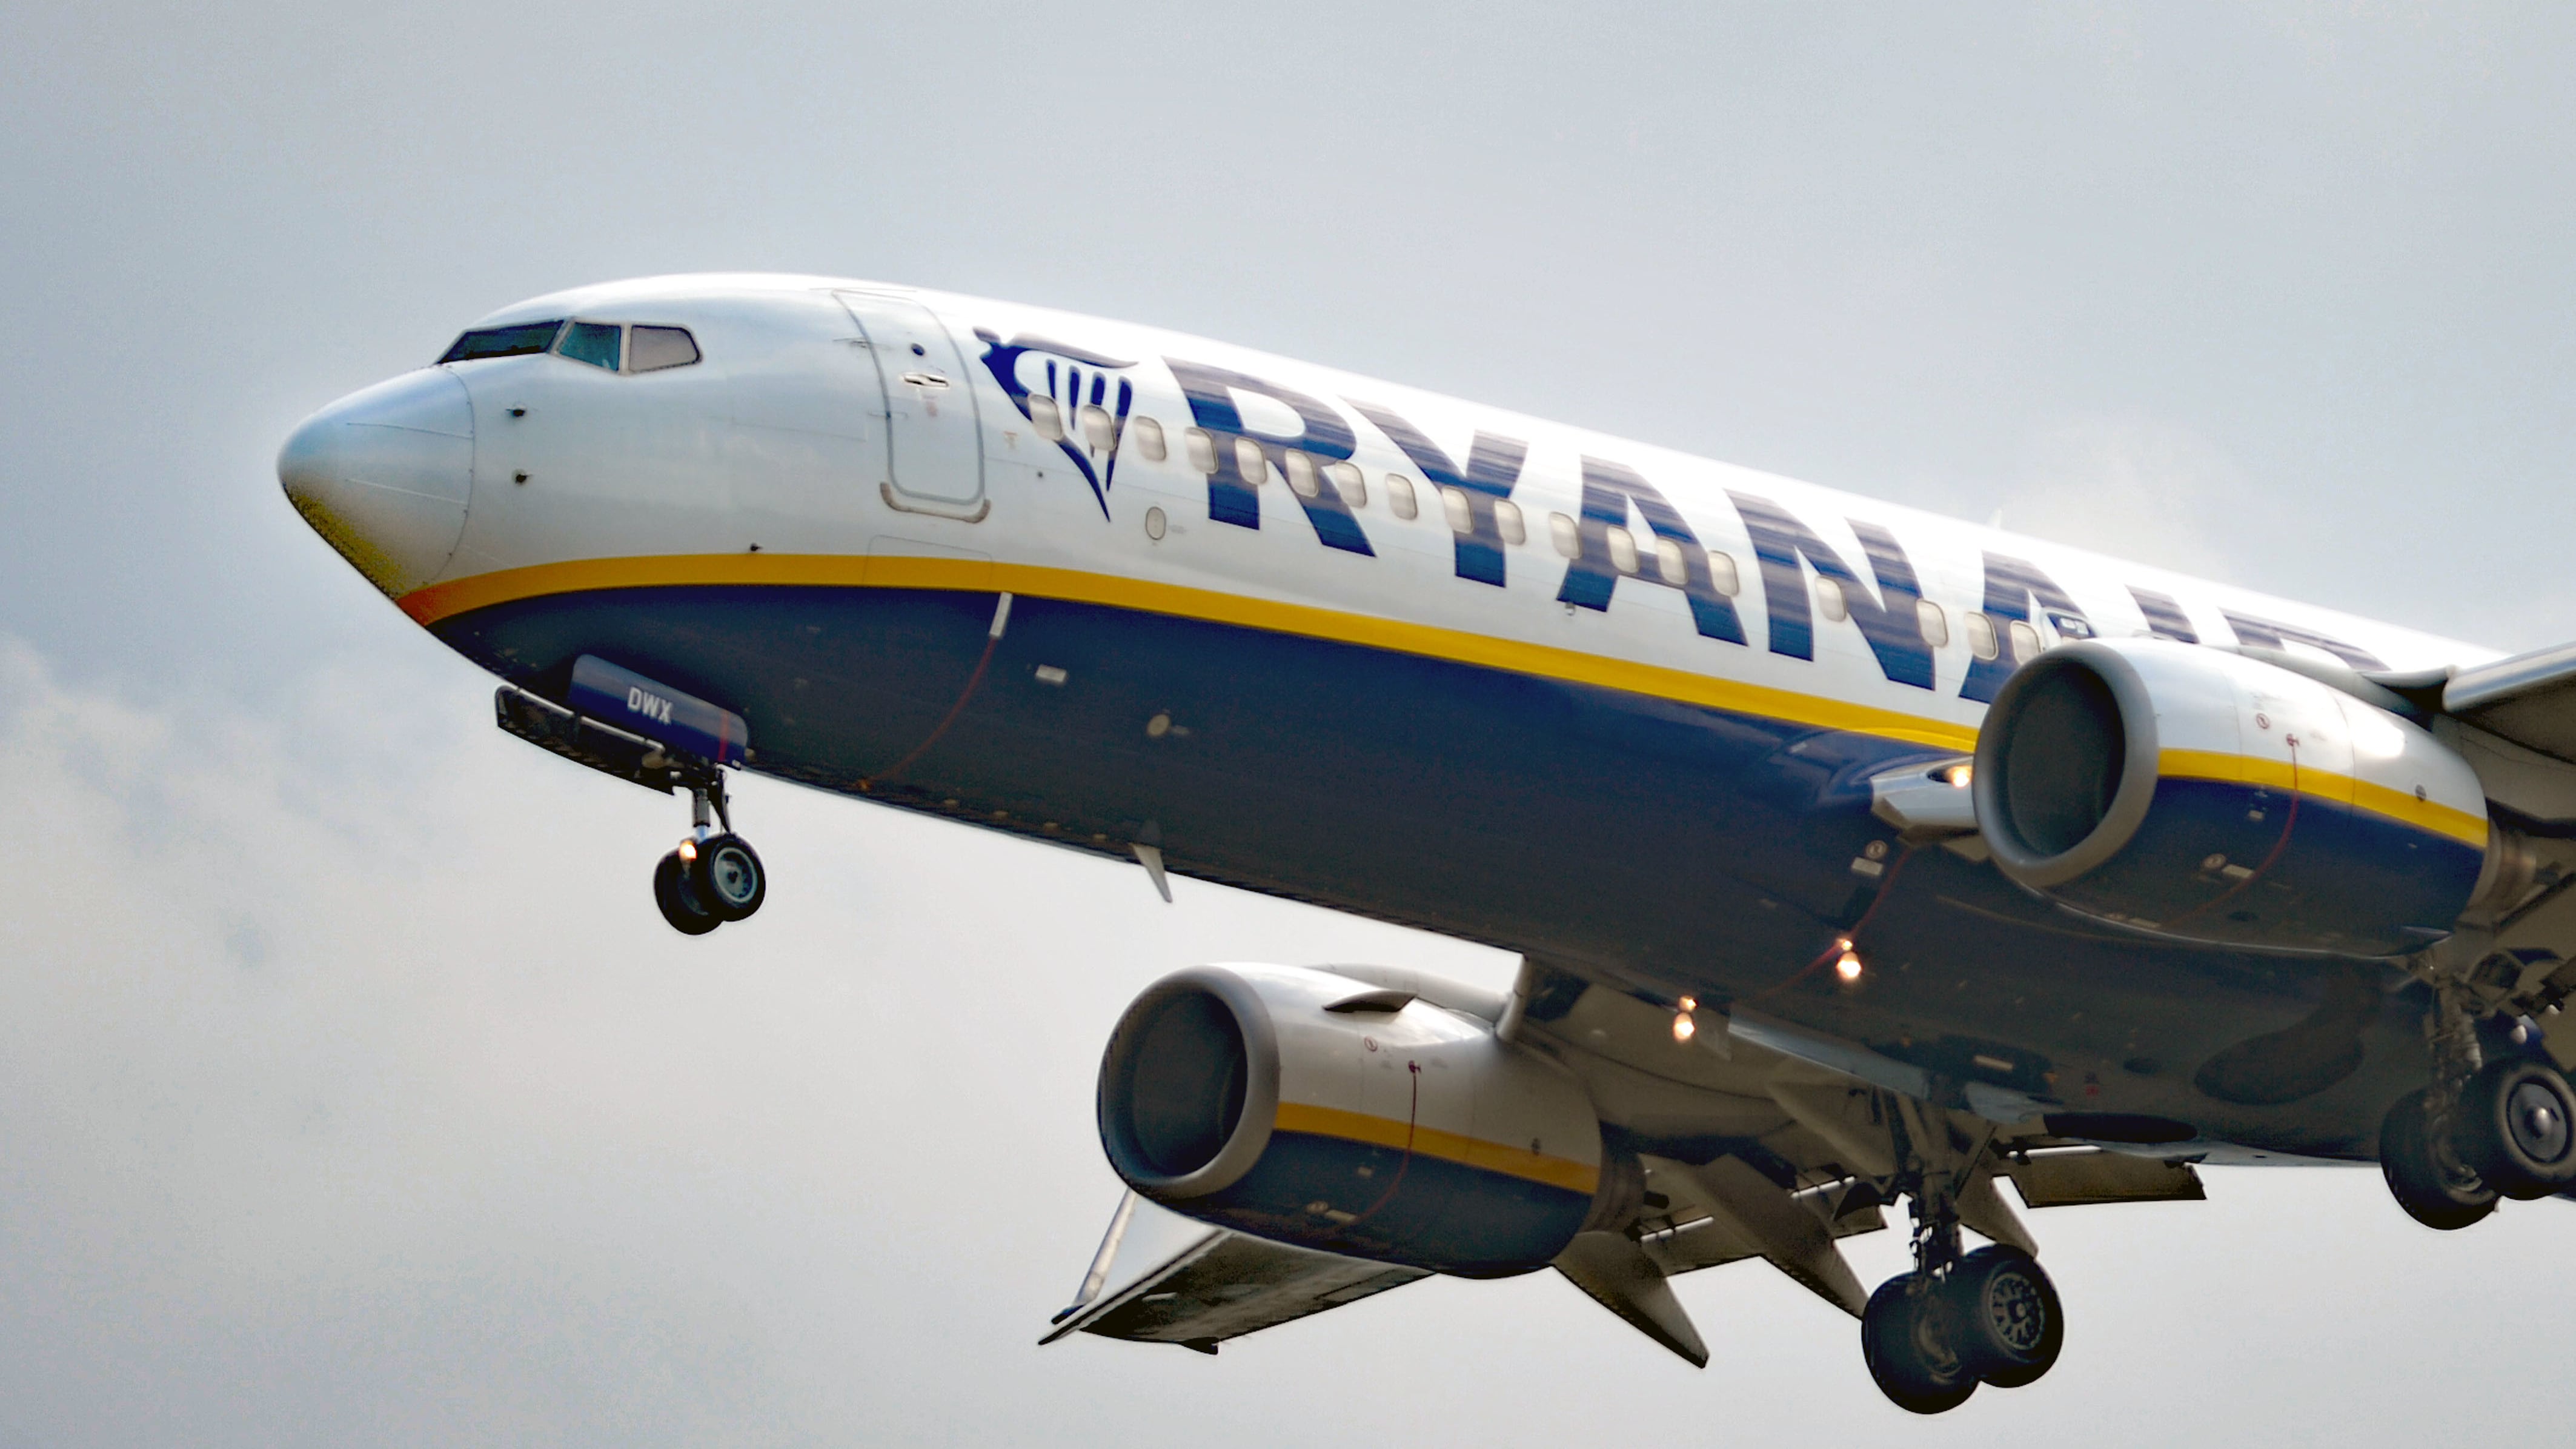 Ryanair has recorded its busiest month in terms of passenger numbers